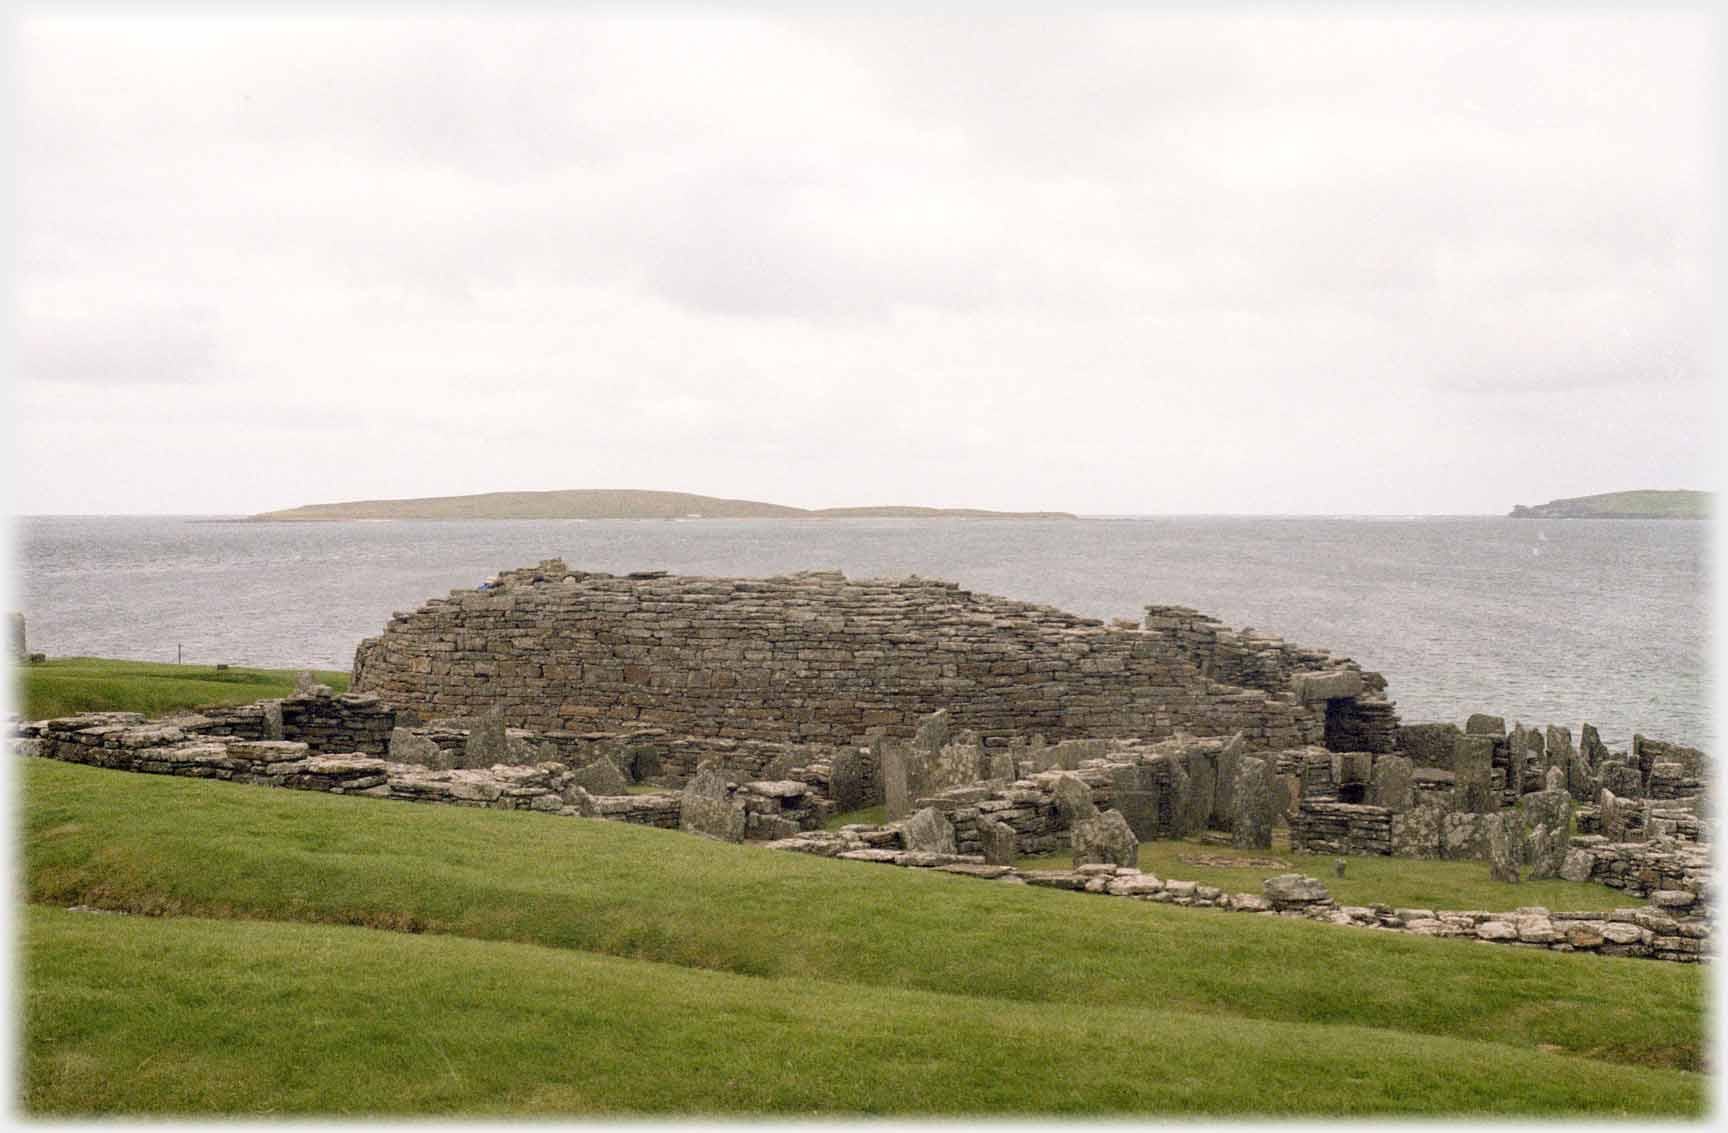 Ruins with sea and islet beyond.